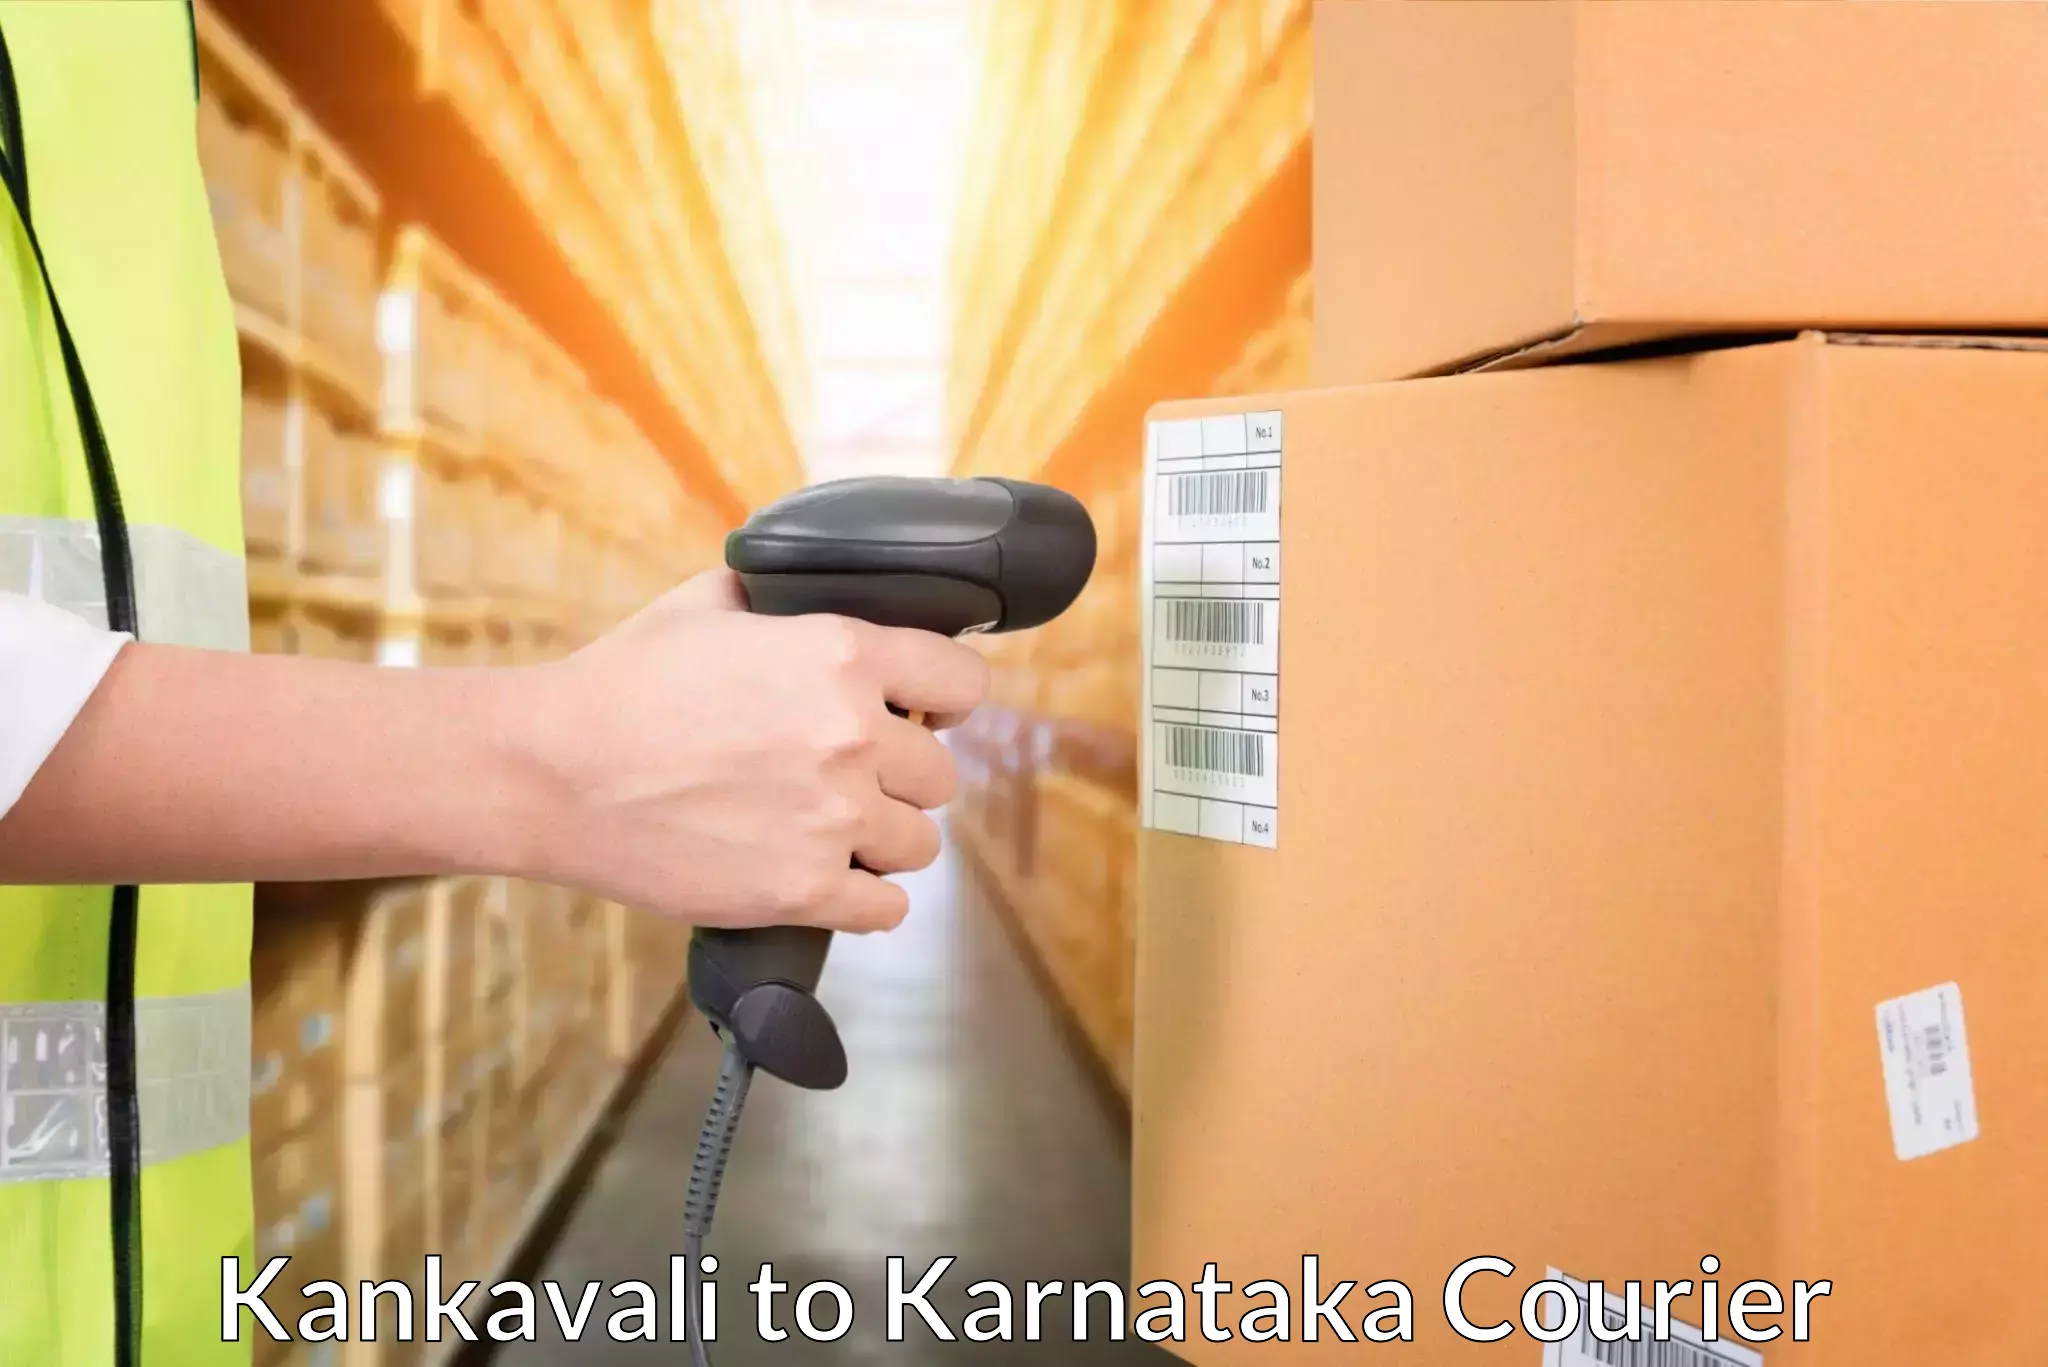 Optimized delivery routes in Kankavali to Moodabidri